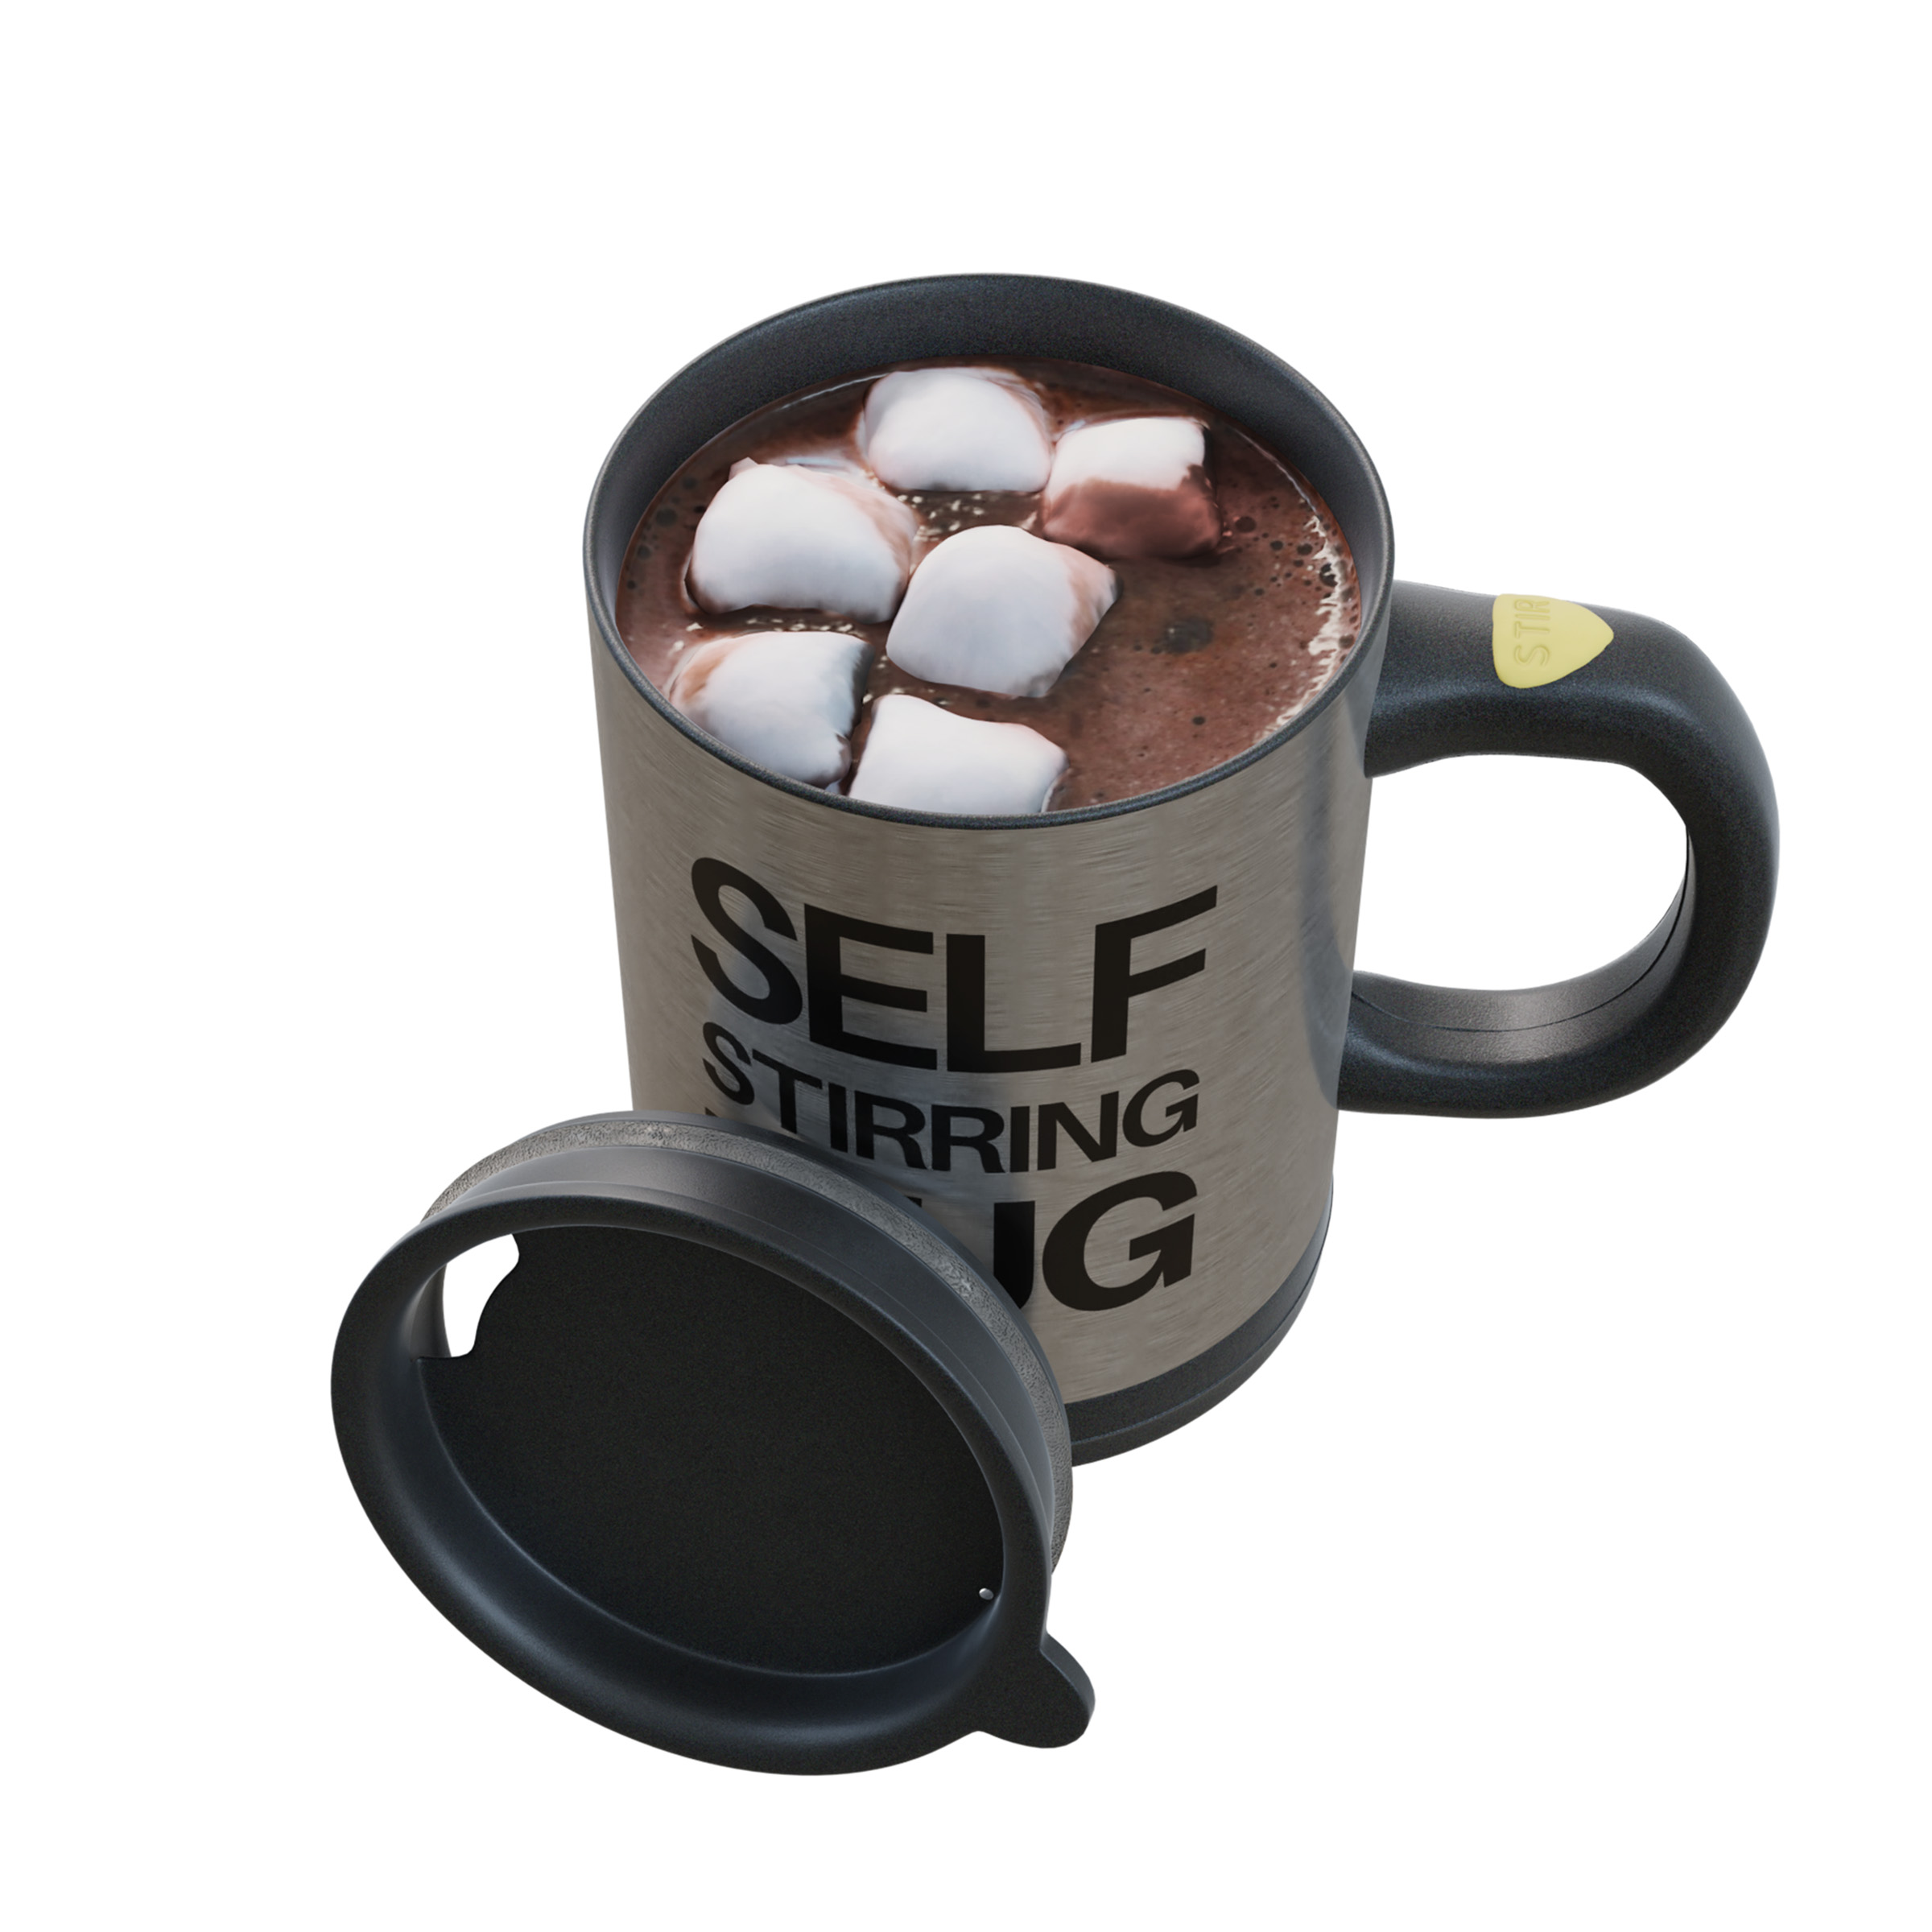 Self Stirring Mug- Reusable Auto Mixing Cup with Travel Lid for Protein Mix, Bulletproof Coffee, Chocolate Milk, Hot Cocoa by Chef Buddy, 15 ozChef Buddy Self Stirring Coffee Hot Chocolate - image 4 of 6